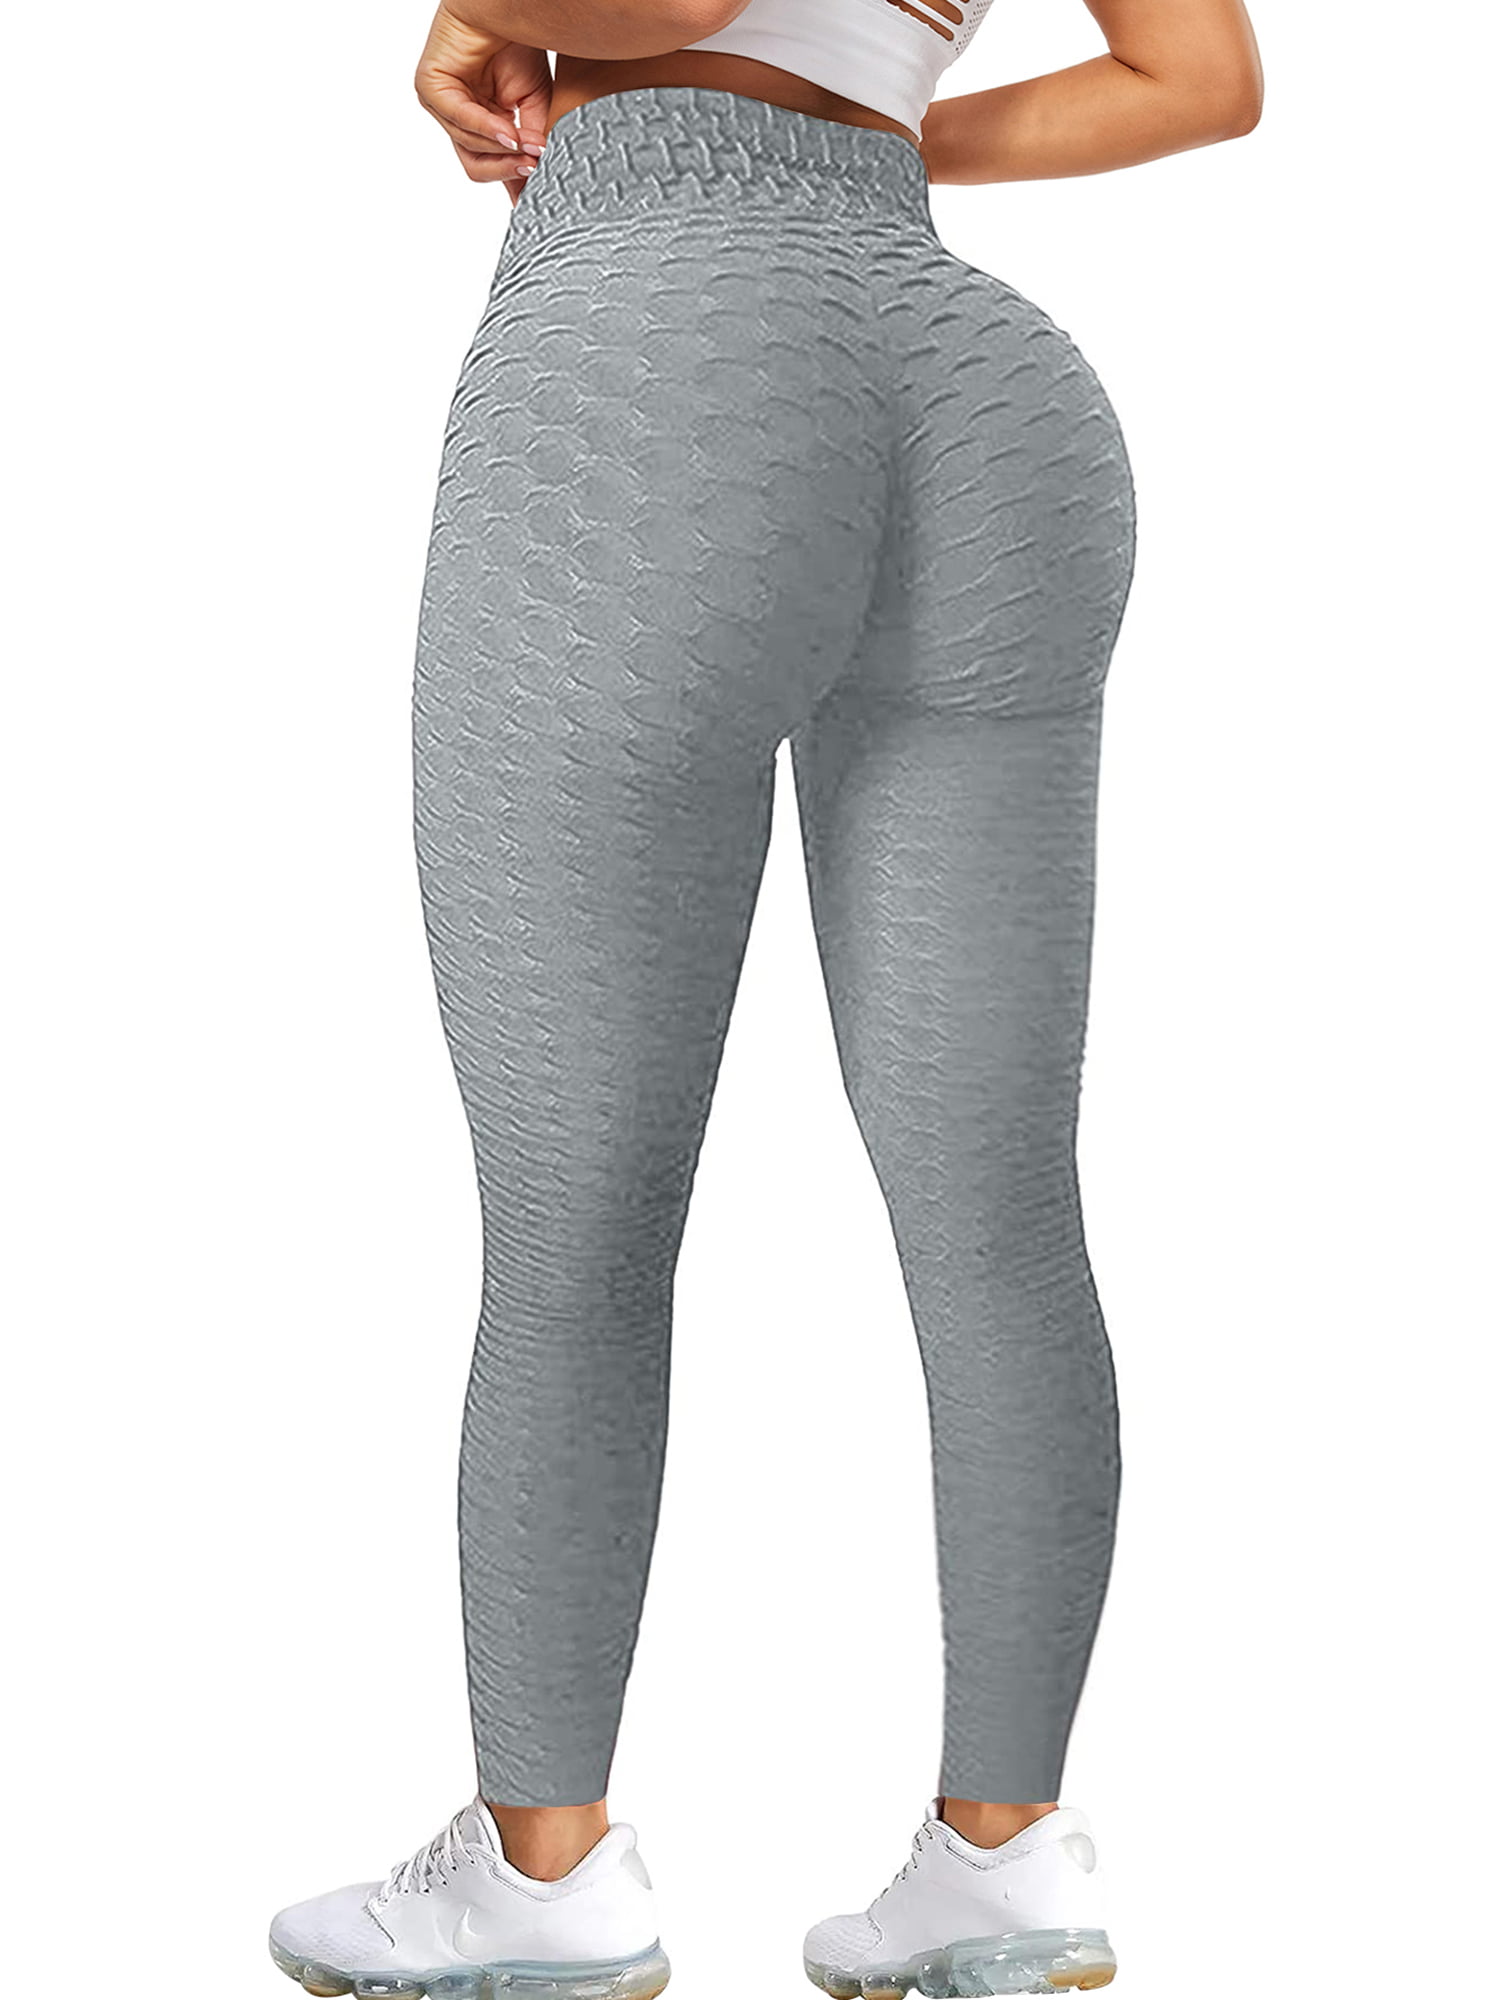 SAYFUT Women's Butt Lift Anti Cellulite Sexy Leggings High Waist Yoga Pants  Workout Tummy Control Textured Booty Tights Pants 